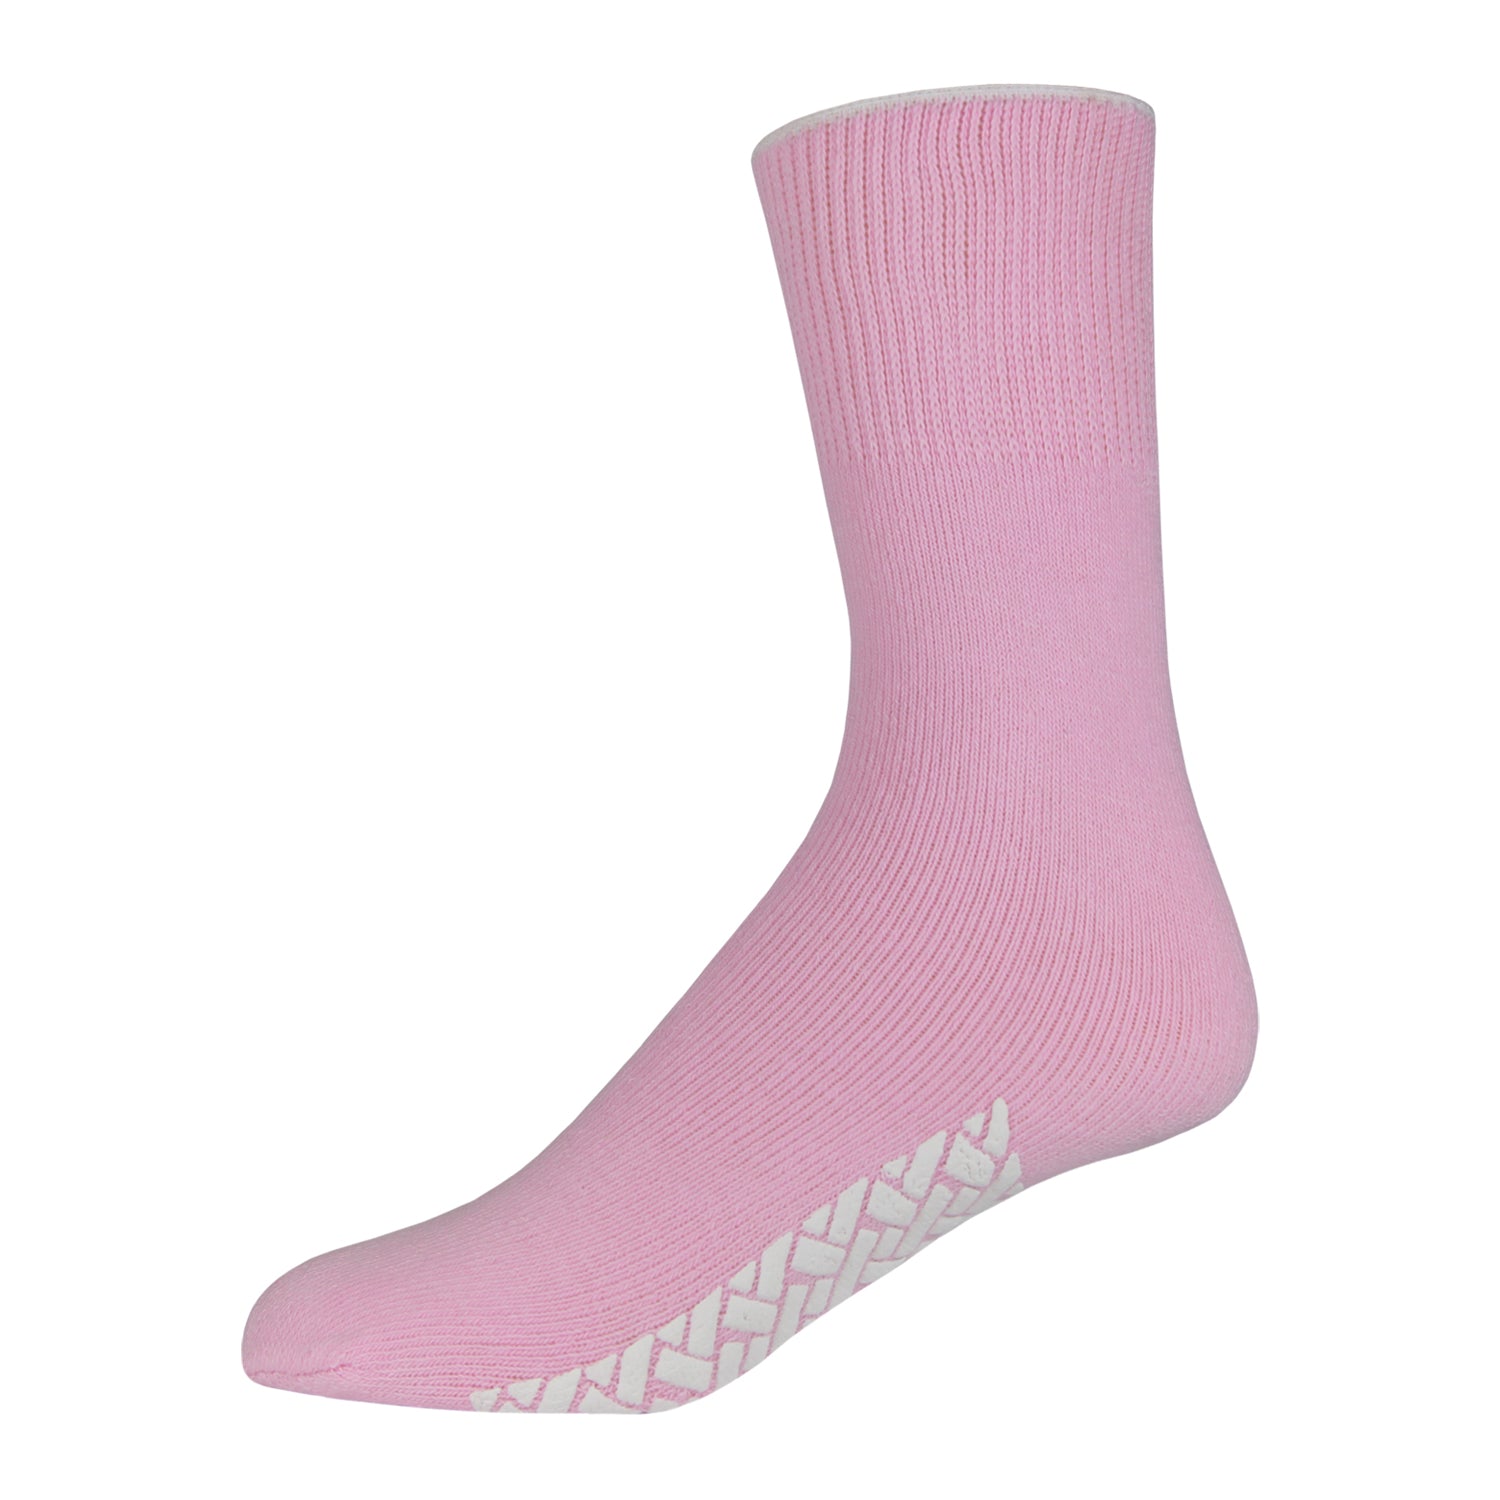 Pink Women's Hospital Socks With The Rubber On The Bottom Of Them And Loose Top